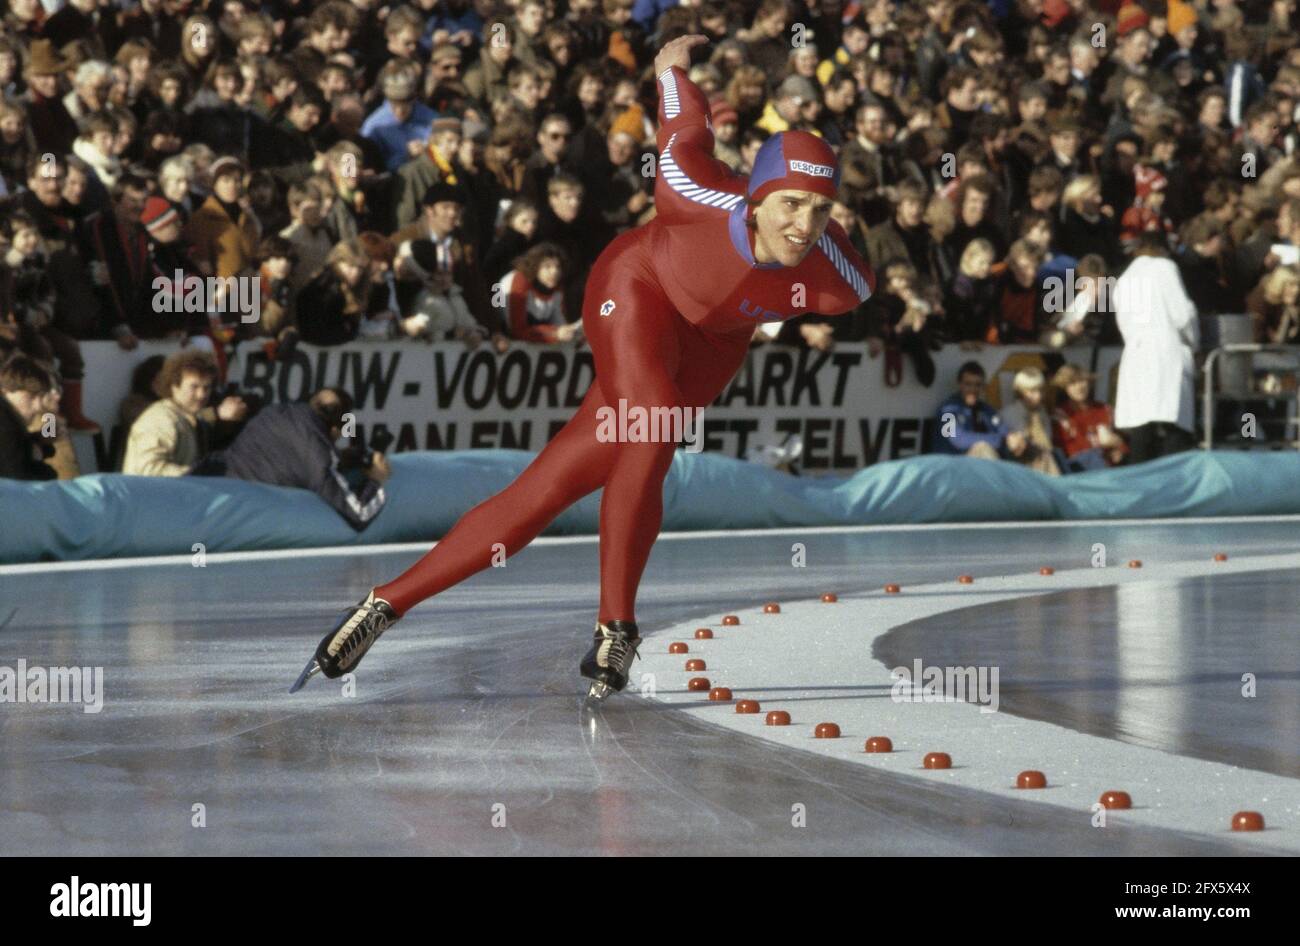 World speed skating championships men's allround in Heerenveen. Eric Heiden in action., March 2, 1980, skating, sport, The Netherlands, 20th century press agency photo, news to remember, documentary, historic photography 1945-1990, visual stories, human history of the Twentieth Century, capturing moments in time Stock Photo